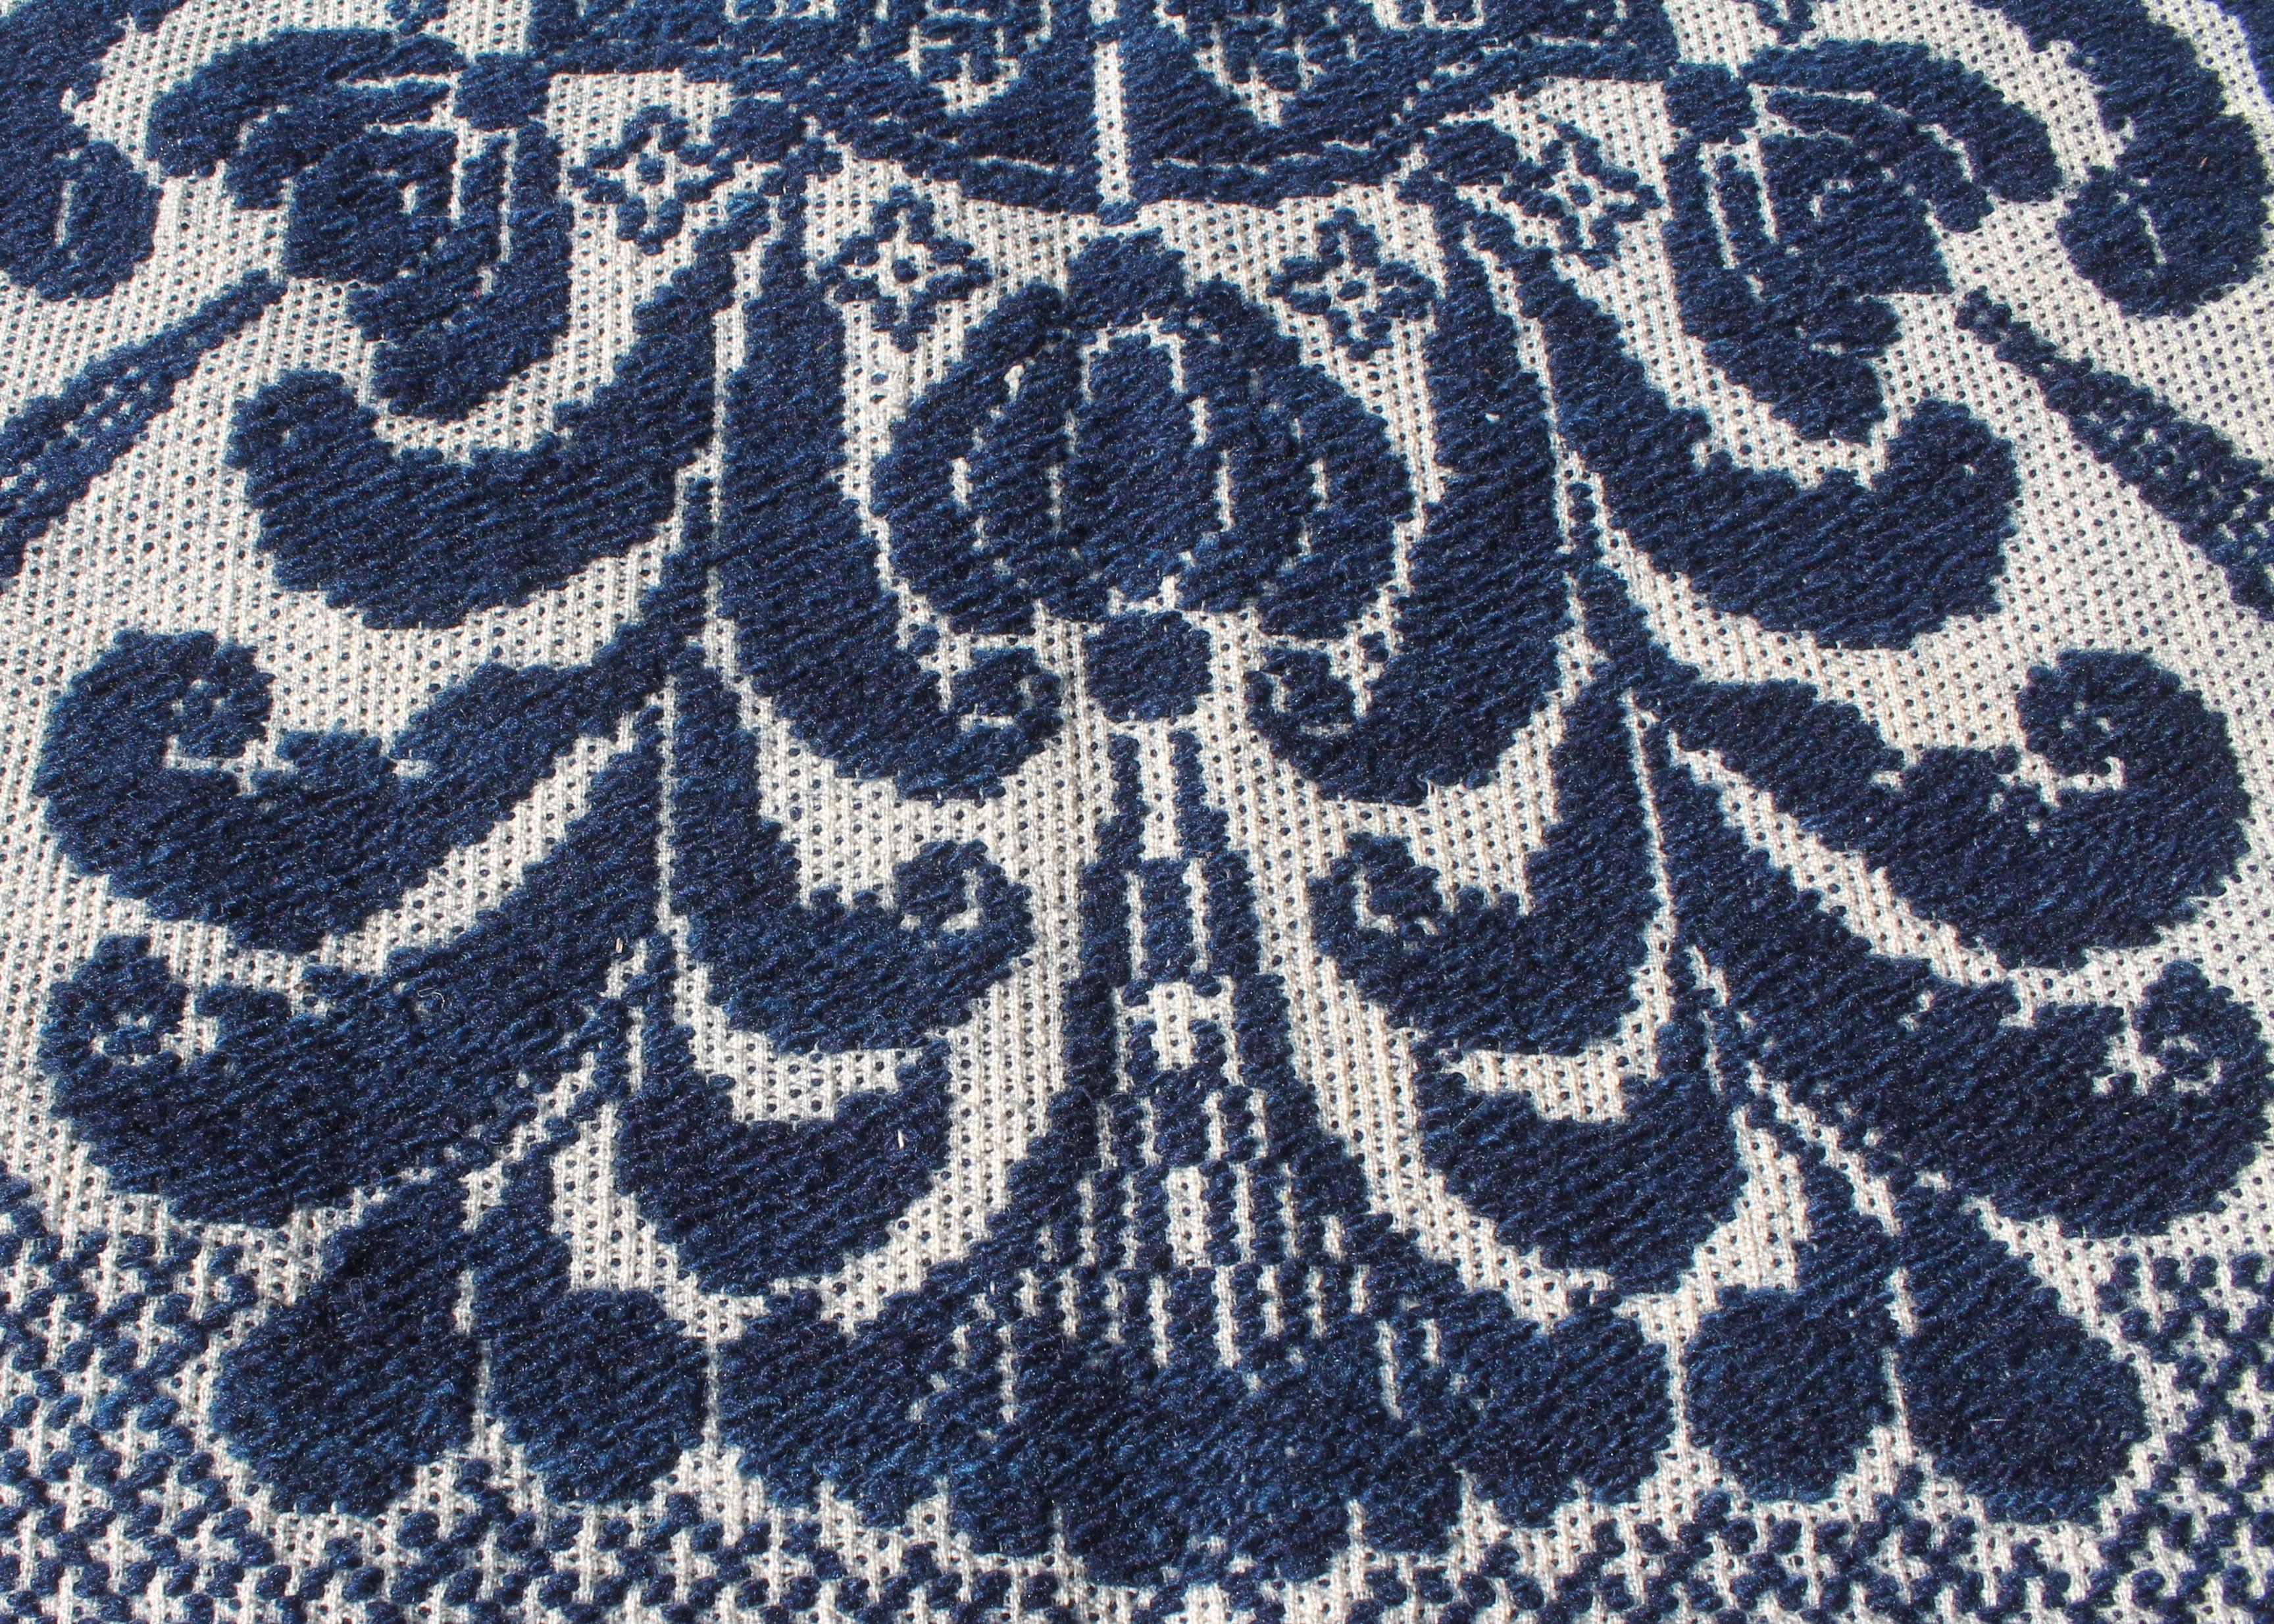 American Classical 19Thc Blue & White Woven Jacquard Coverlet From Pennsylvania For Sale